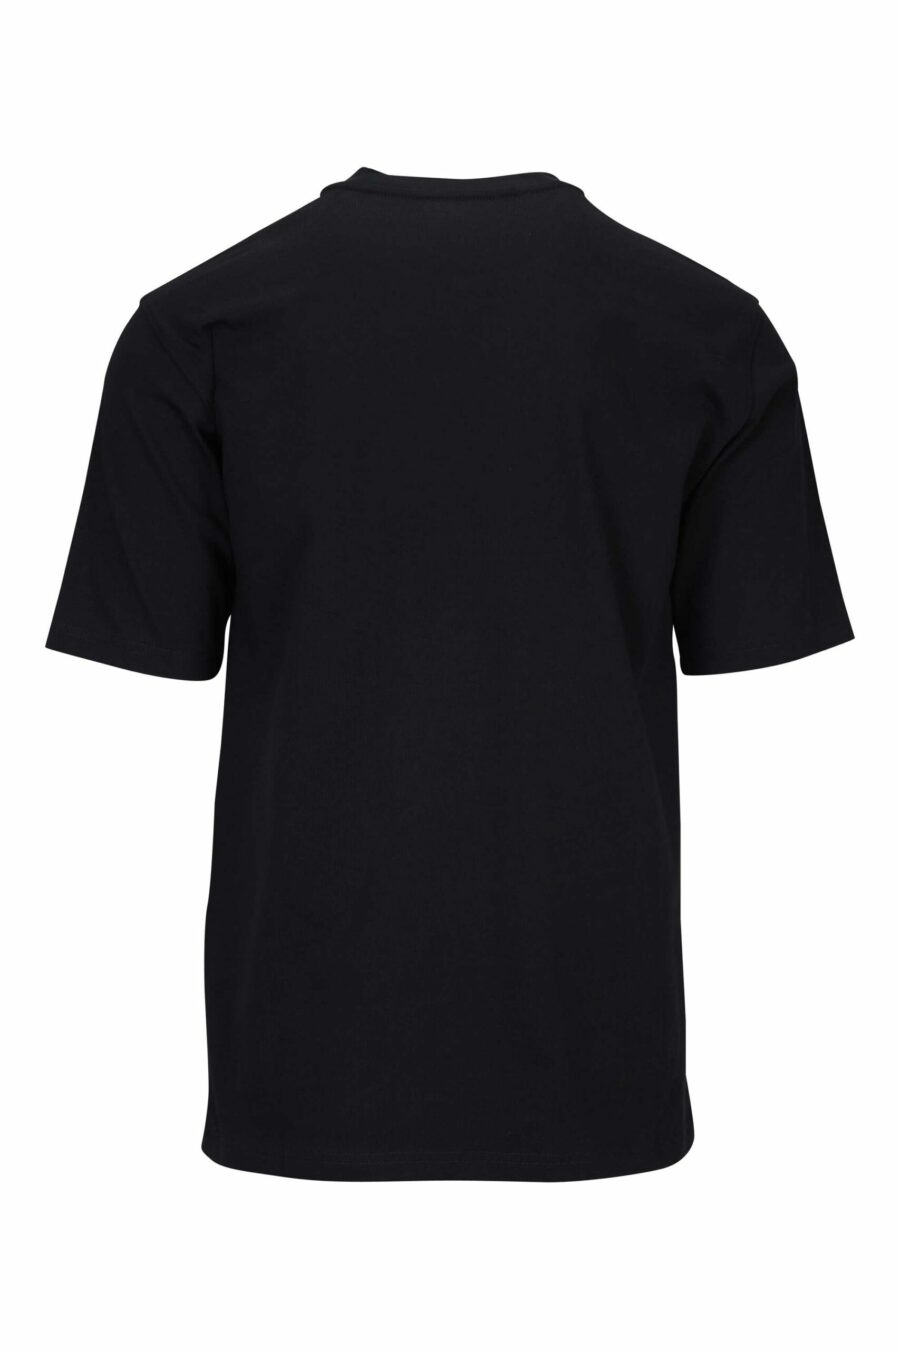 Black T-shirt mix with monochrome pocket and logo label - 667113452036 2 scaled